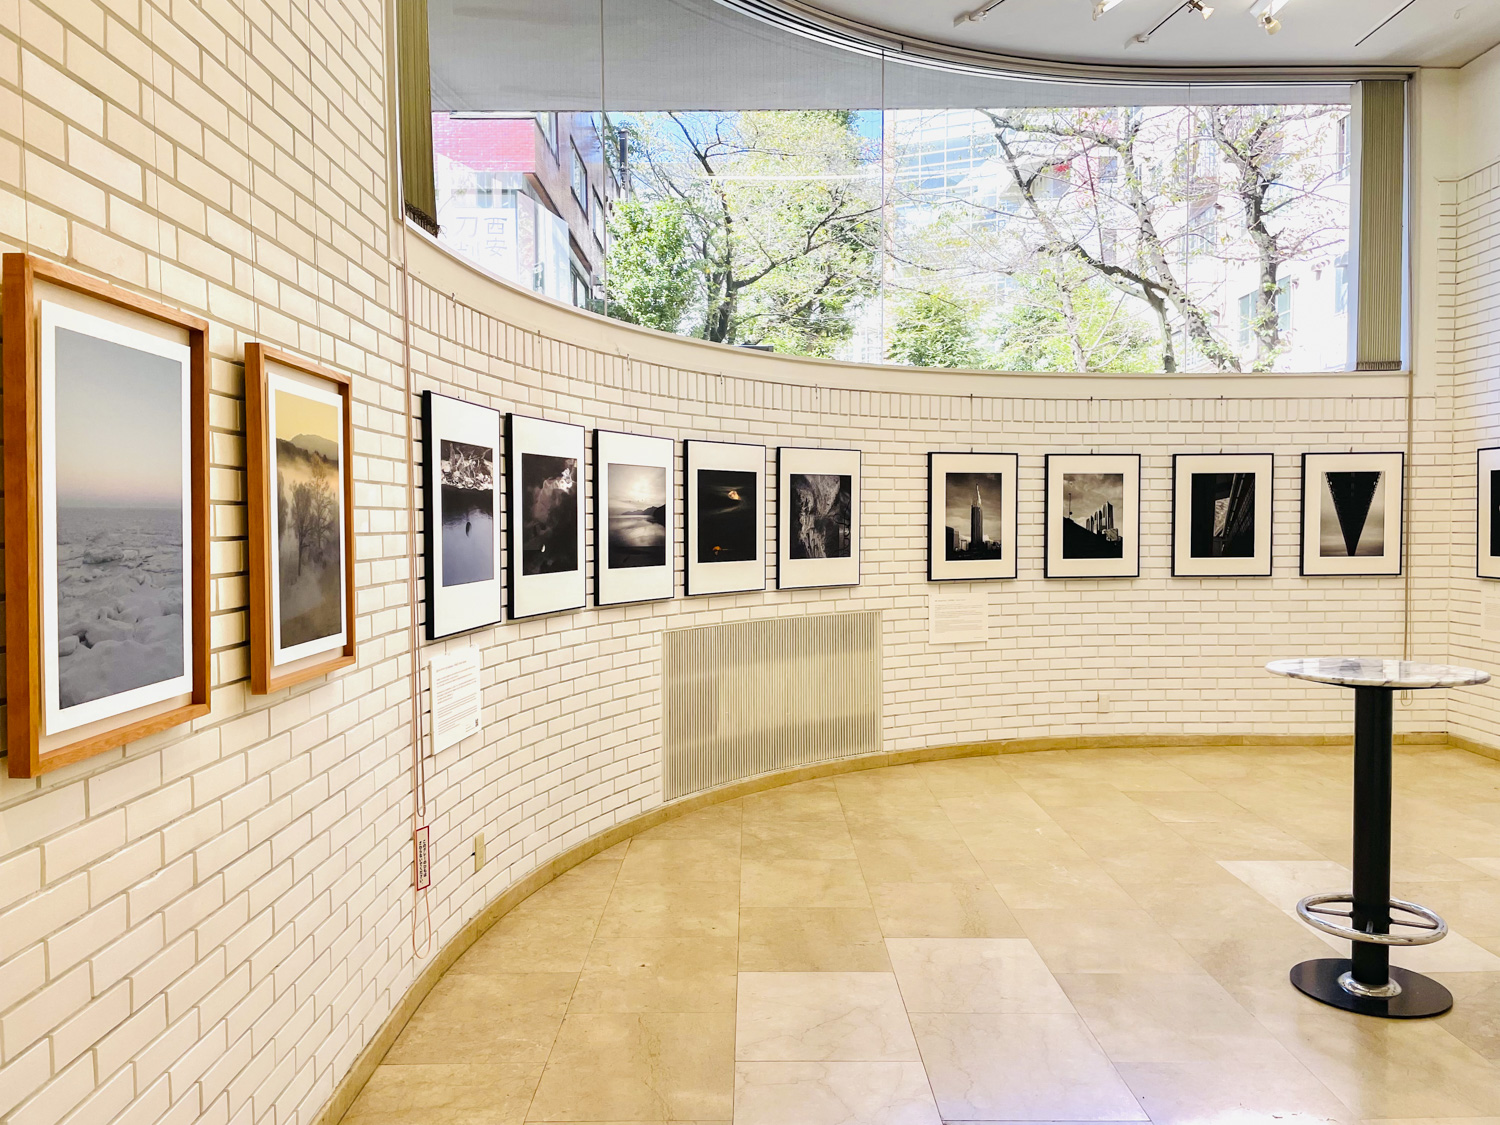 SAMURAI FOTO group exhibition “The Power of Photography”